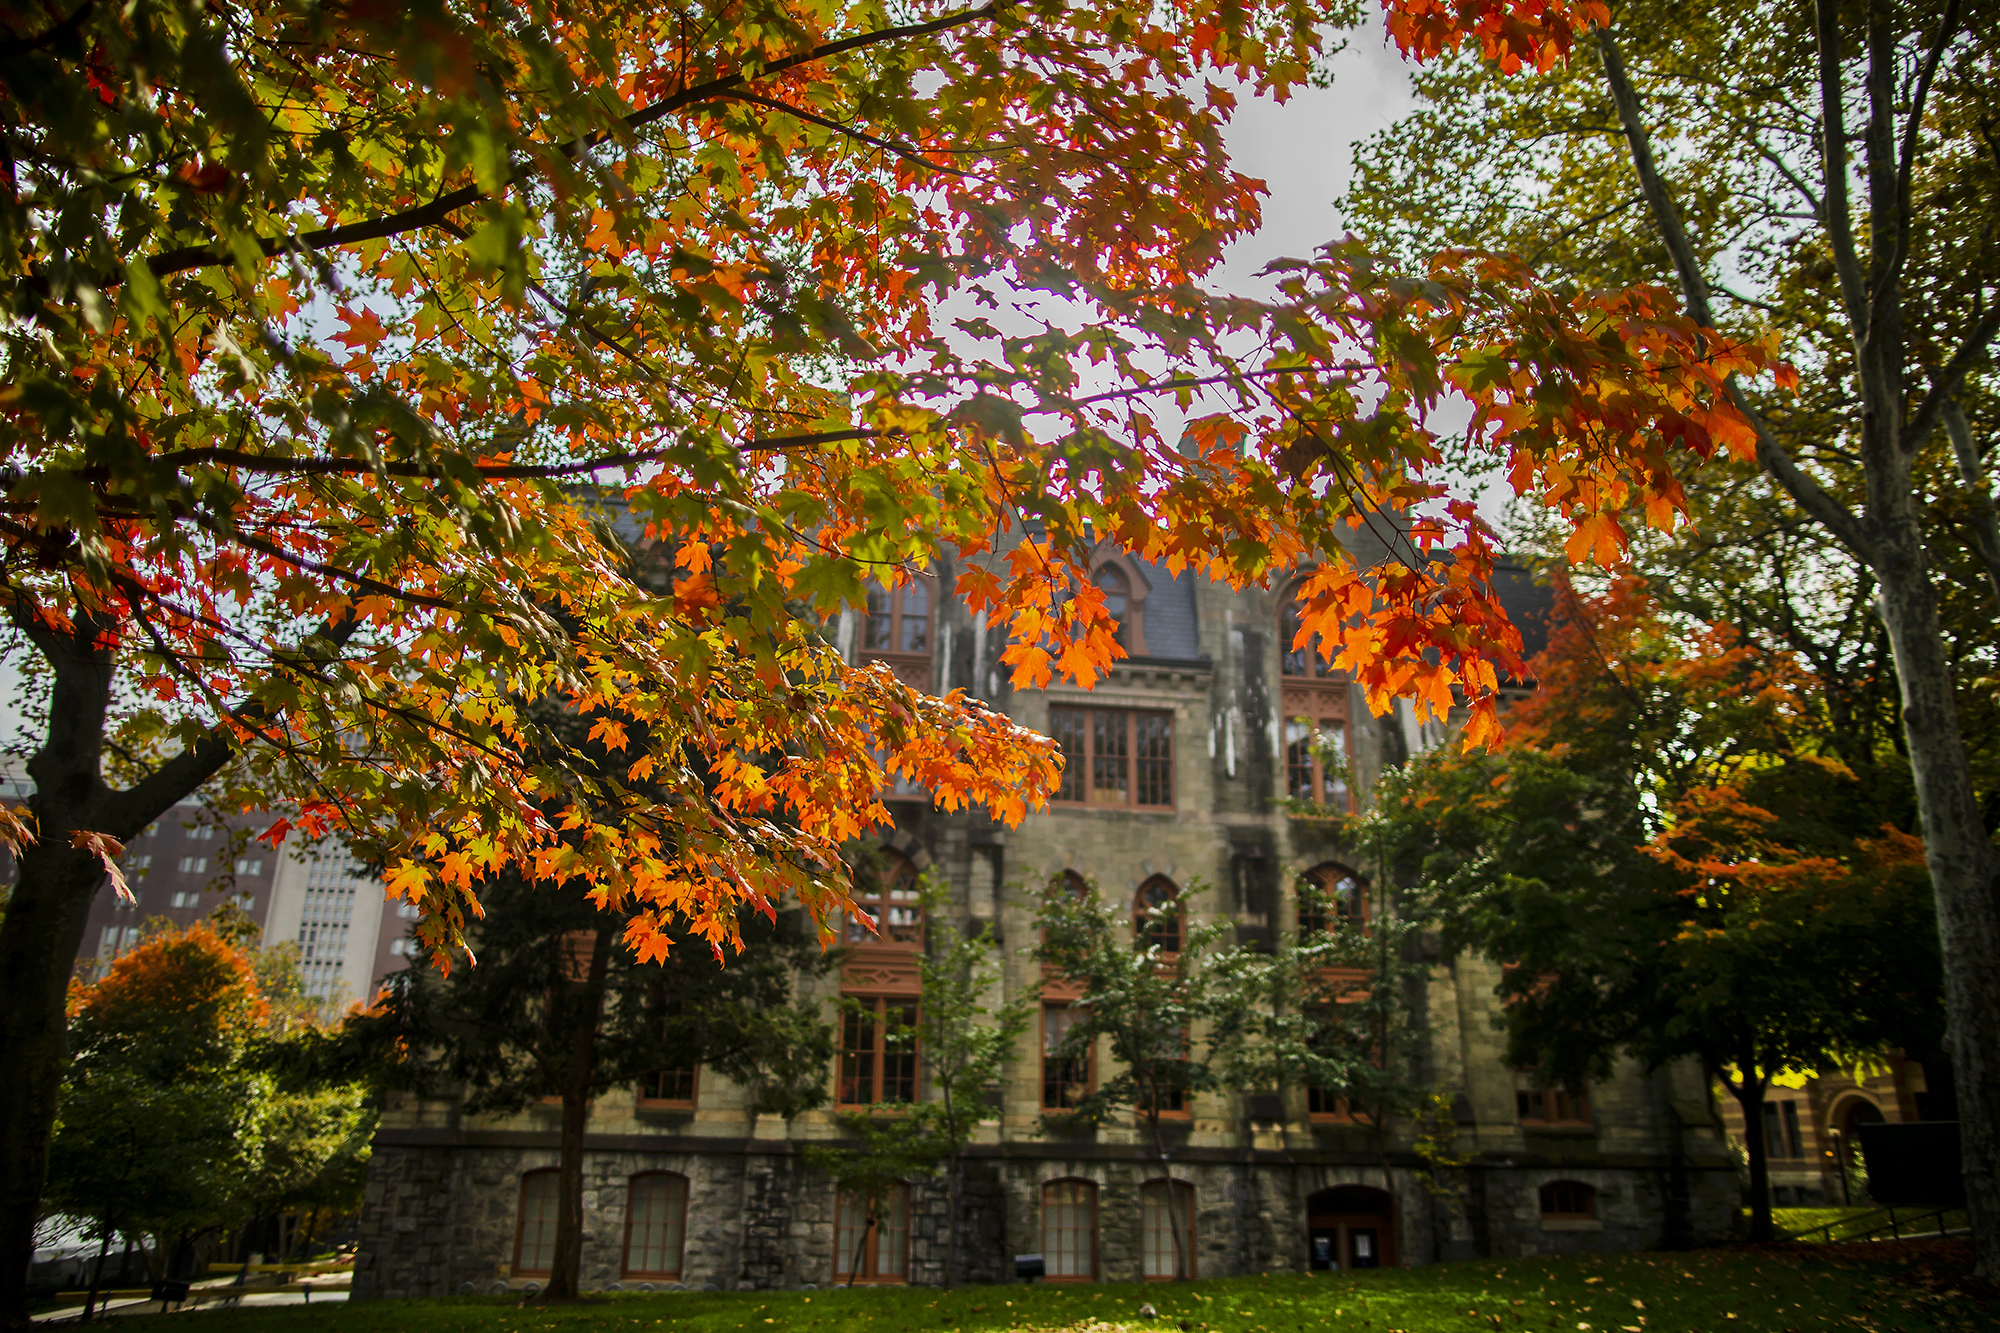 College Hall in daylight in autumn surrounded by fall foliage.